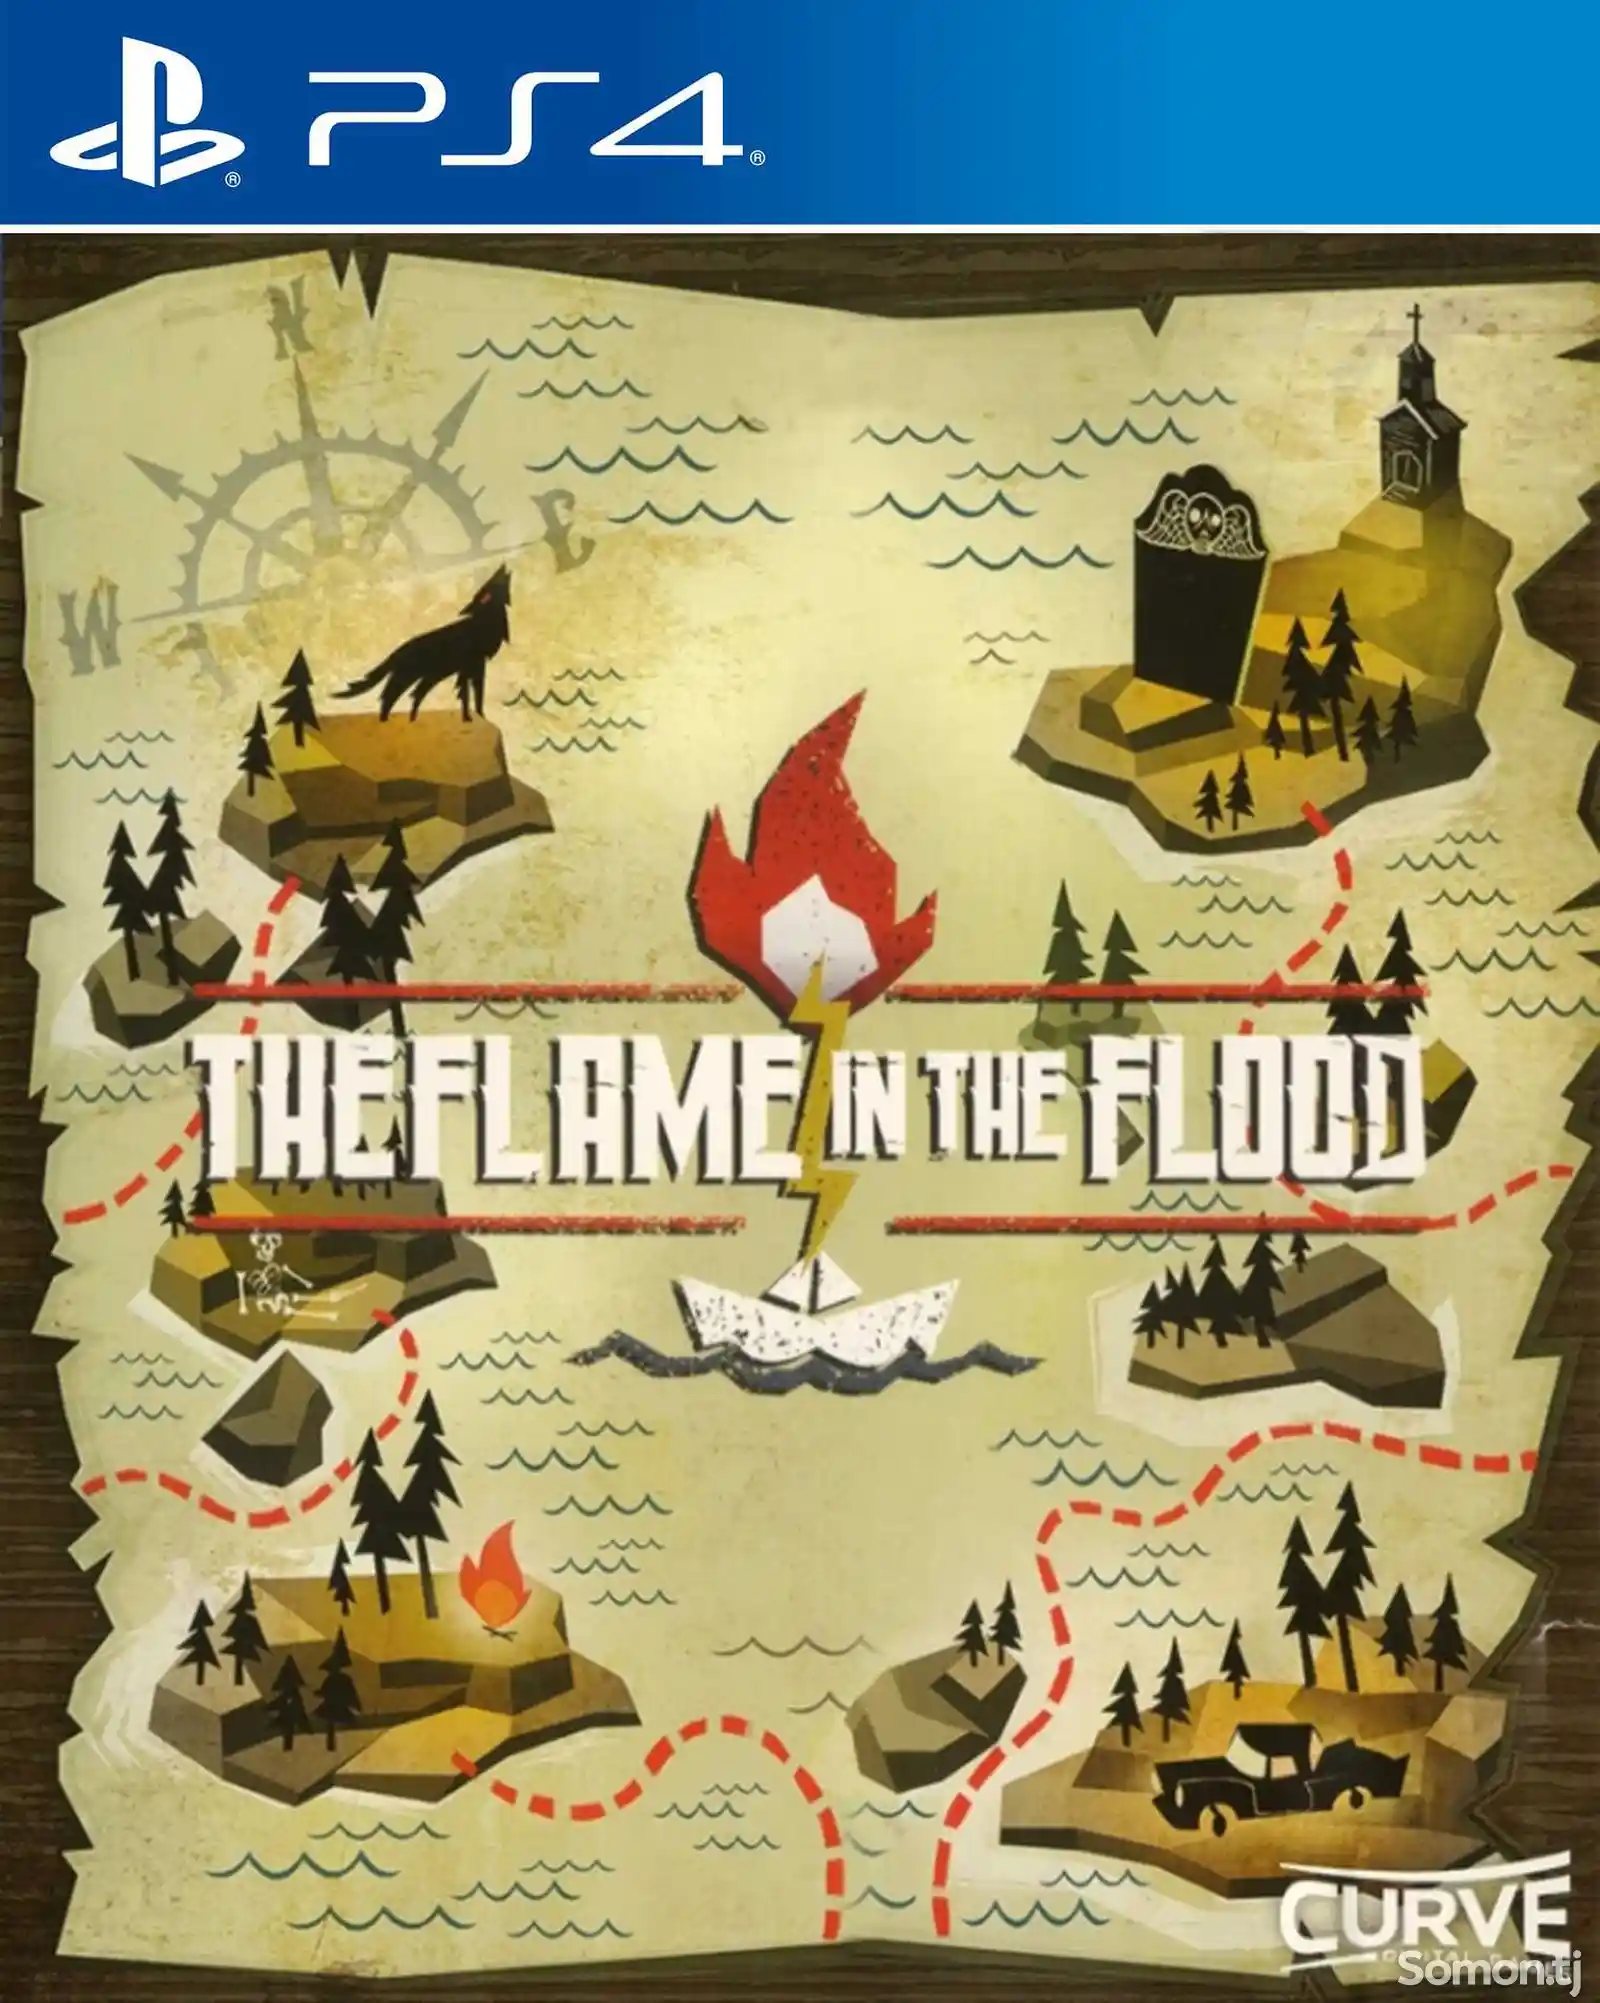 Игра The flame in the flood для PS-4 / 5.05 / 6.72 / 7.02 / 7.55 / 9.00 /-1